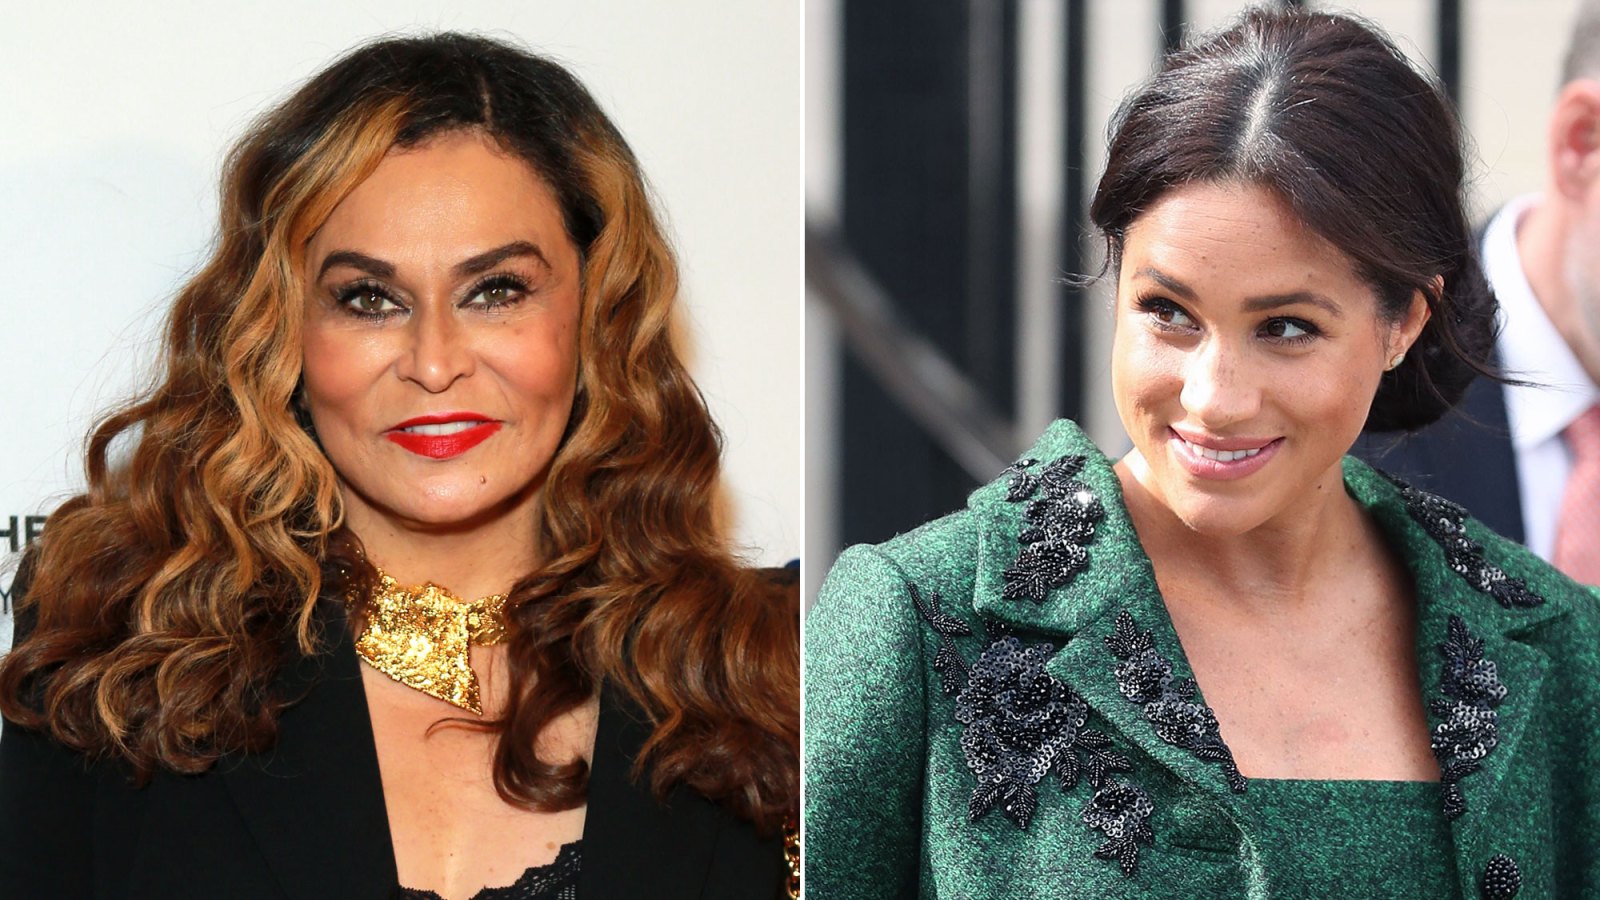 Tina Knowles Gushes Over 'Beautiful Intelligent Independent' Duchess Meghan